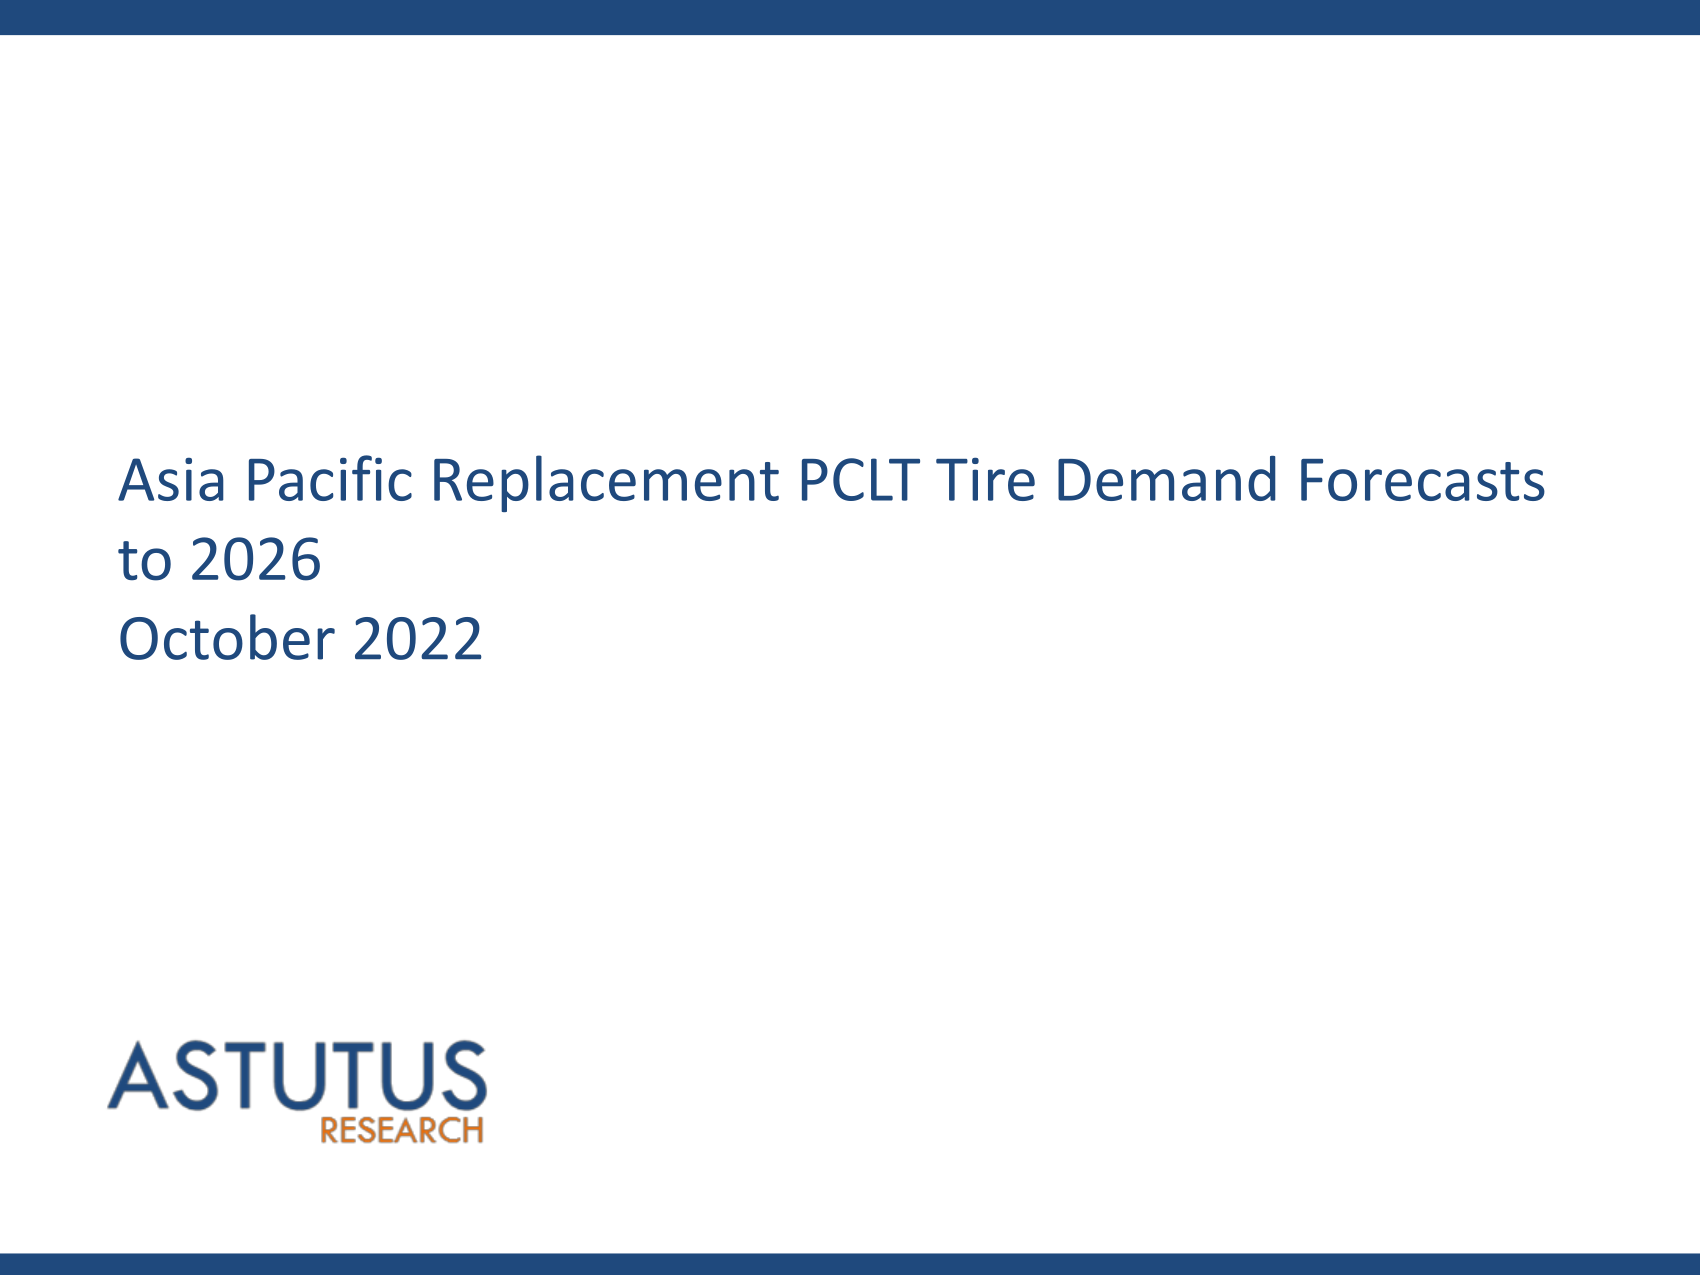 Asia Pacific Replacement PCLT Tire Market Forecasts to 2026